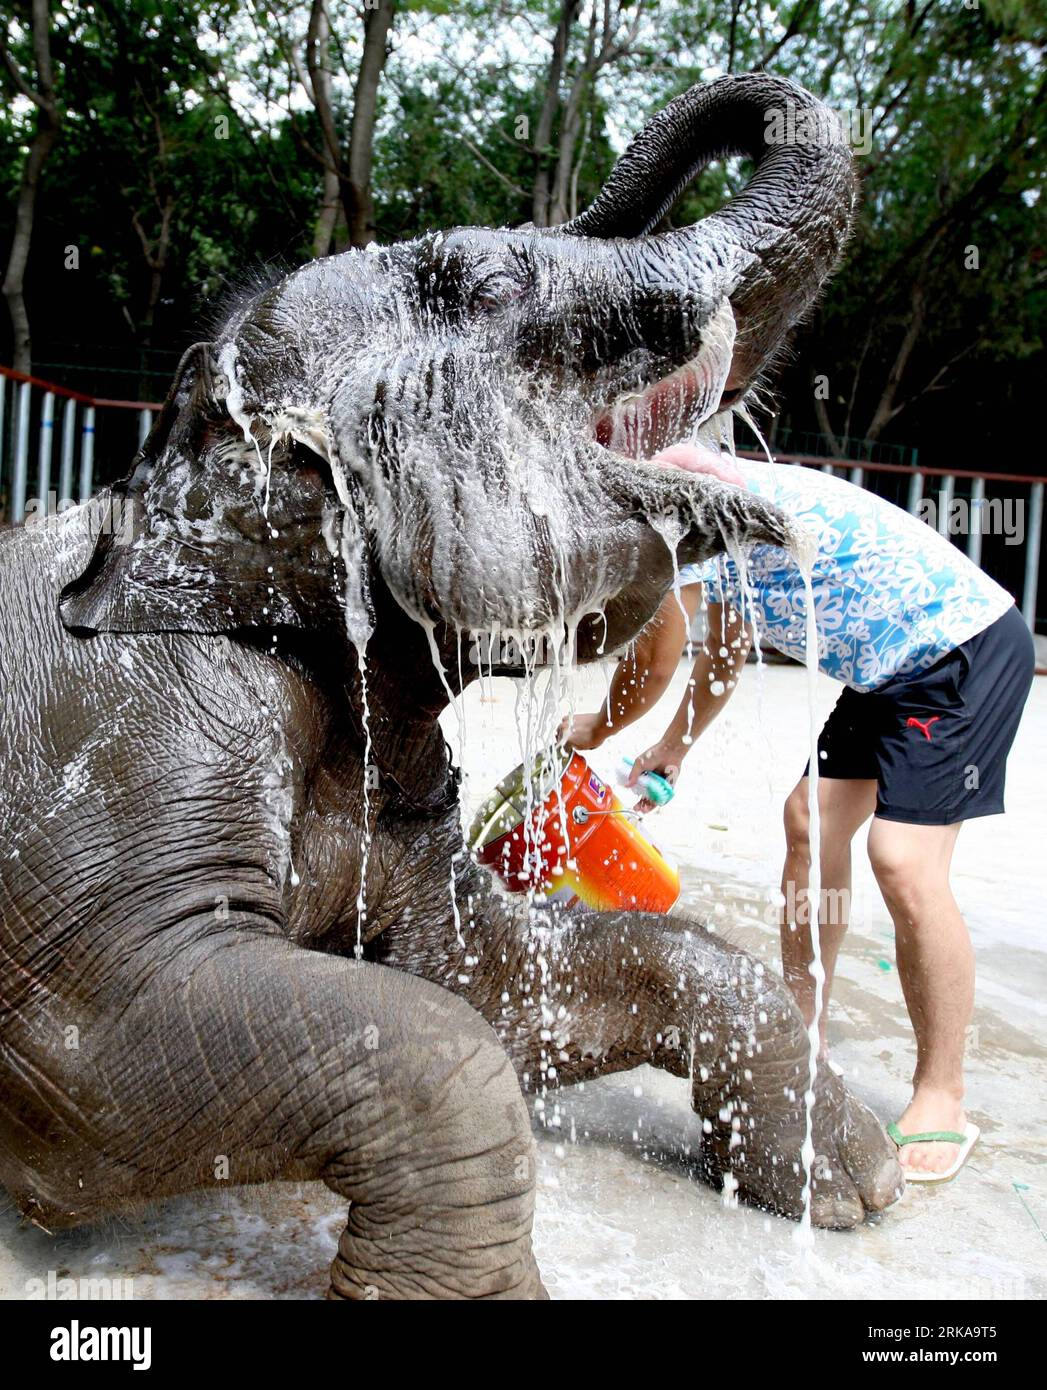 Bildnummer: 54293154  Datum: 12.08.2010  Copyright: imago/Xinhua (100812) -- HUAIBEI, Aug. 12, 2010 (Xinhua) -- A zookeeper cools down an elephant in Xiangshan zoo in Huaibei, east China s Anhui Province, Aug. 12, 2010. As temperature reached 37 degrees Celsius in Huaibei on Thursday, zookeepers endeavor to make animals stay cool. (Xinhua/Wang Wen) (cxy) CHINA-HEAT-ANIMALS (CN) PUBLICATIONxNOTxINxCHN Gesellschaft Tiere kbdig xsk 2010 hoch o0 Hitze Abkühlung Jahreszeit Sommer    Bildnummer 54293154 Date 12 08 2010 Copyright Imago XINHUA  Huaibei Aug 12 2010 XINHUA a zookeeper Cools Down to Elep Stock Photo